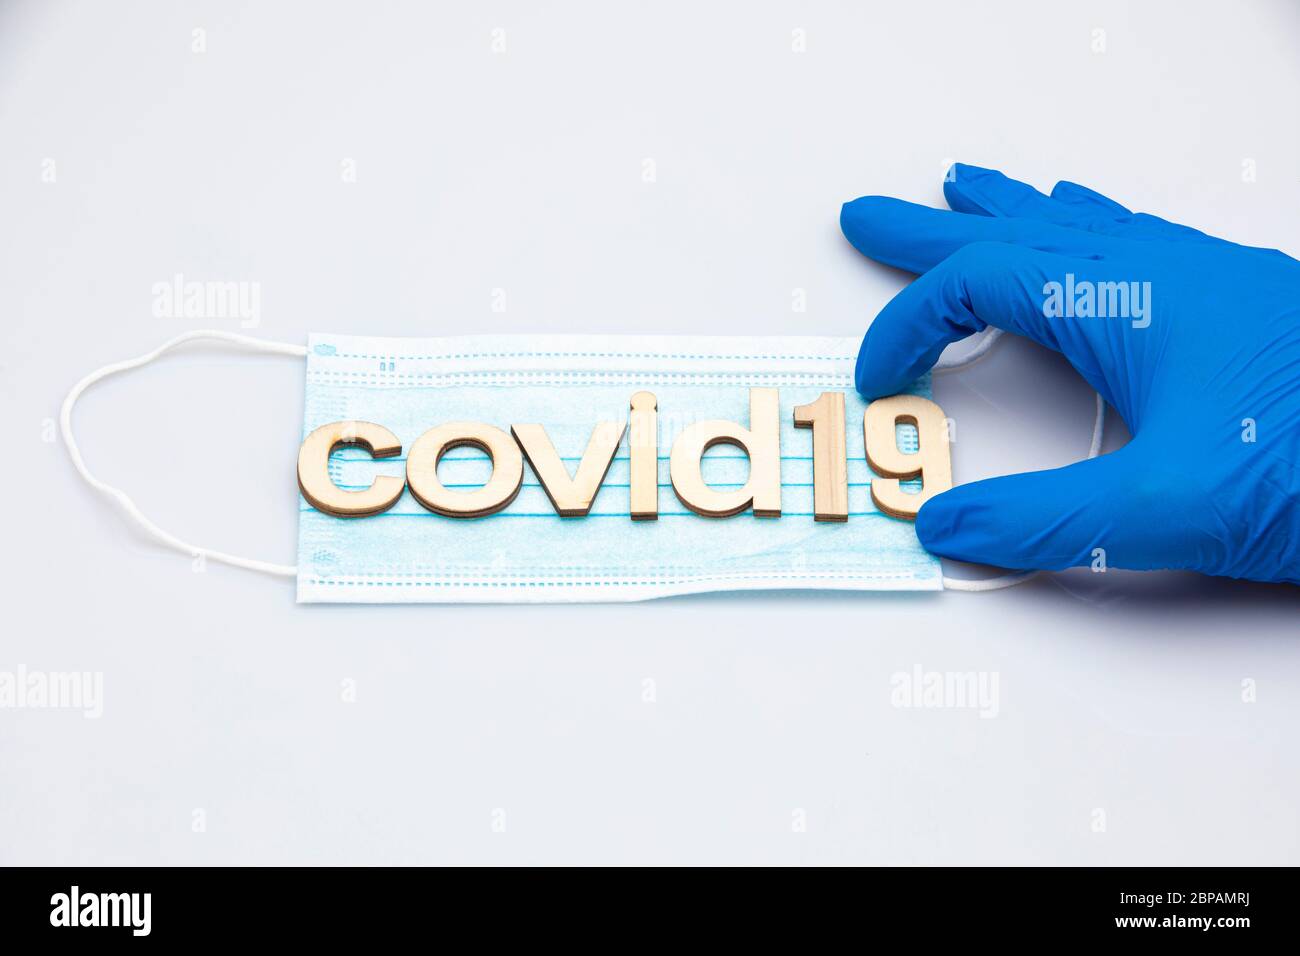 hand with a blue surgical glove holding the last part of the word covid19 formed with letters placed on a surgical mask isolated on a white background Stock Photo